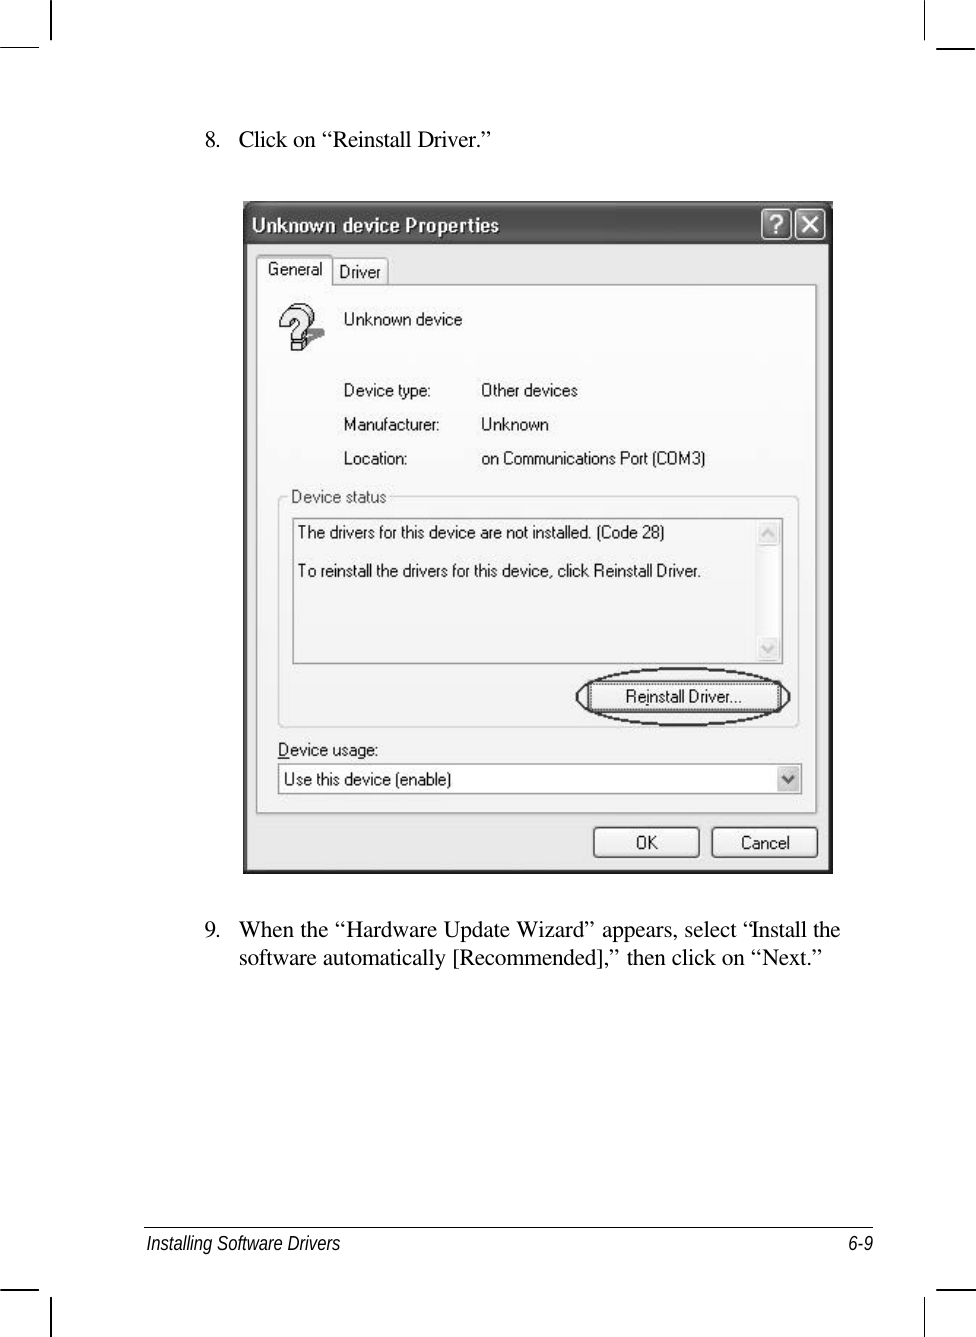  Installing Software Drivers 6-9 8. Click on “Reinstall Driver.”  9. When the “Hardware Update Wizard” appears, select “Install the software automatically [Recommended],” then click on “Next.” 